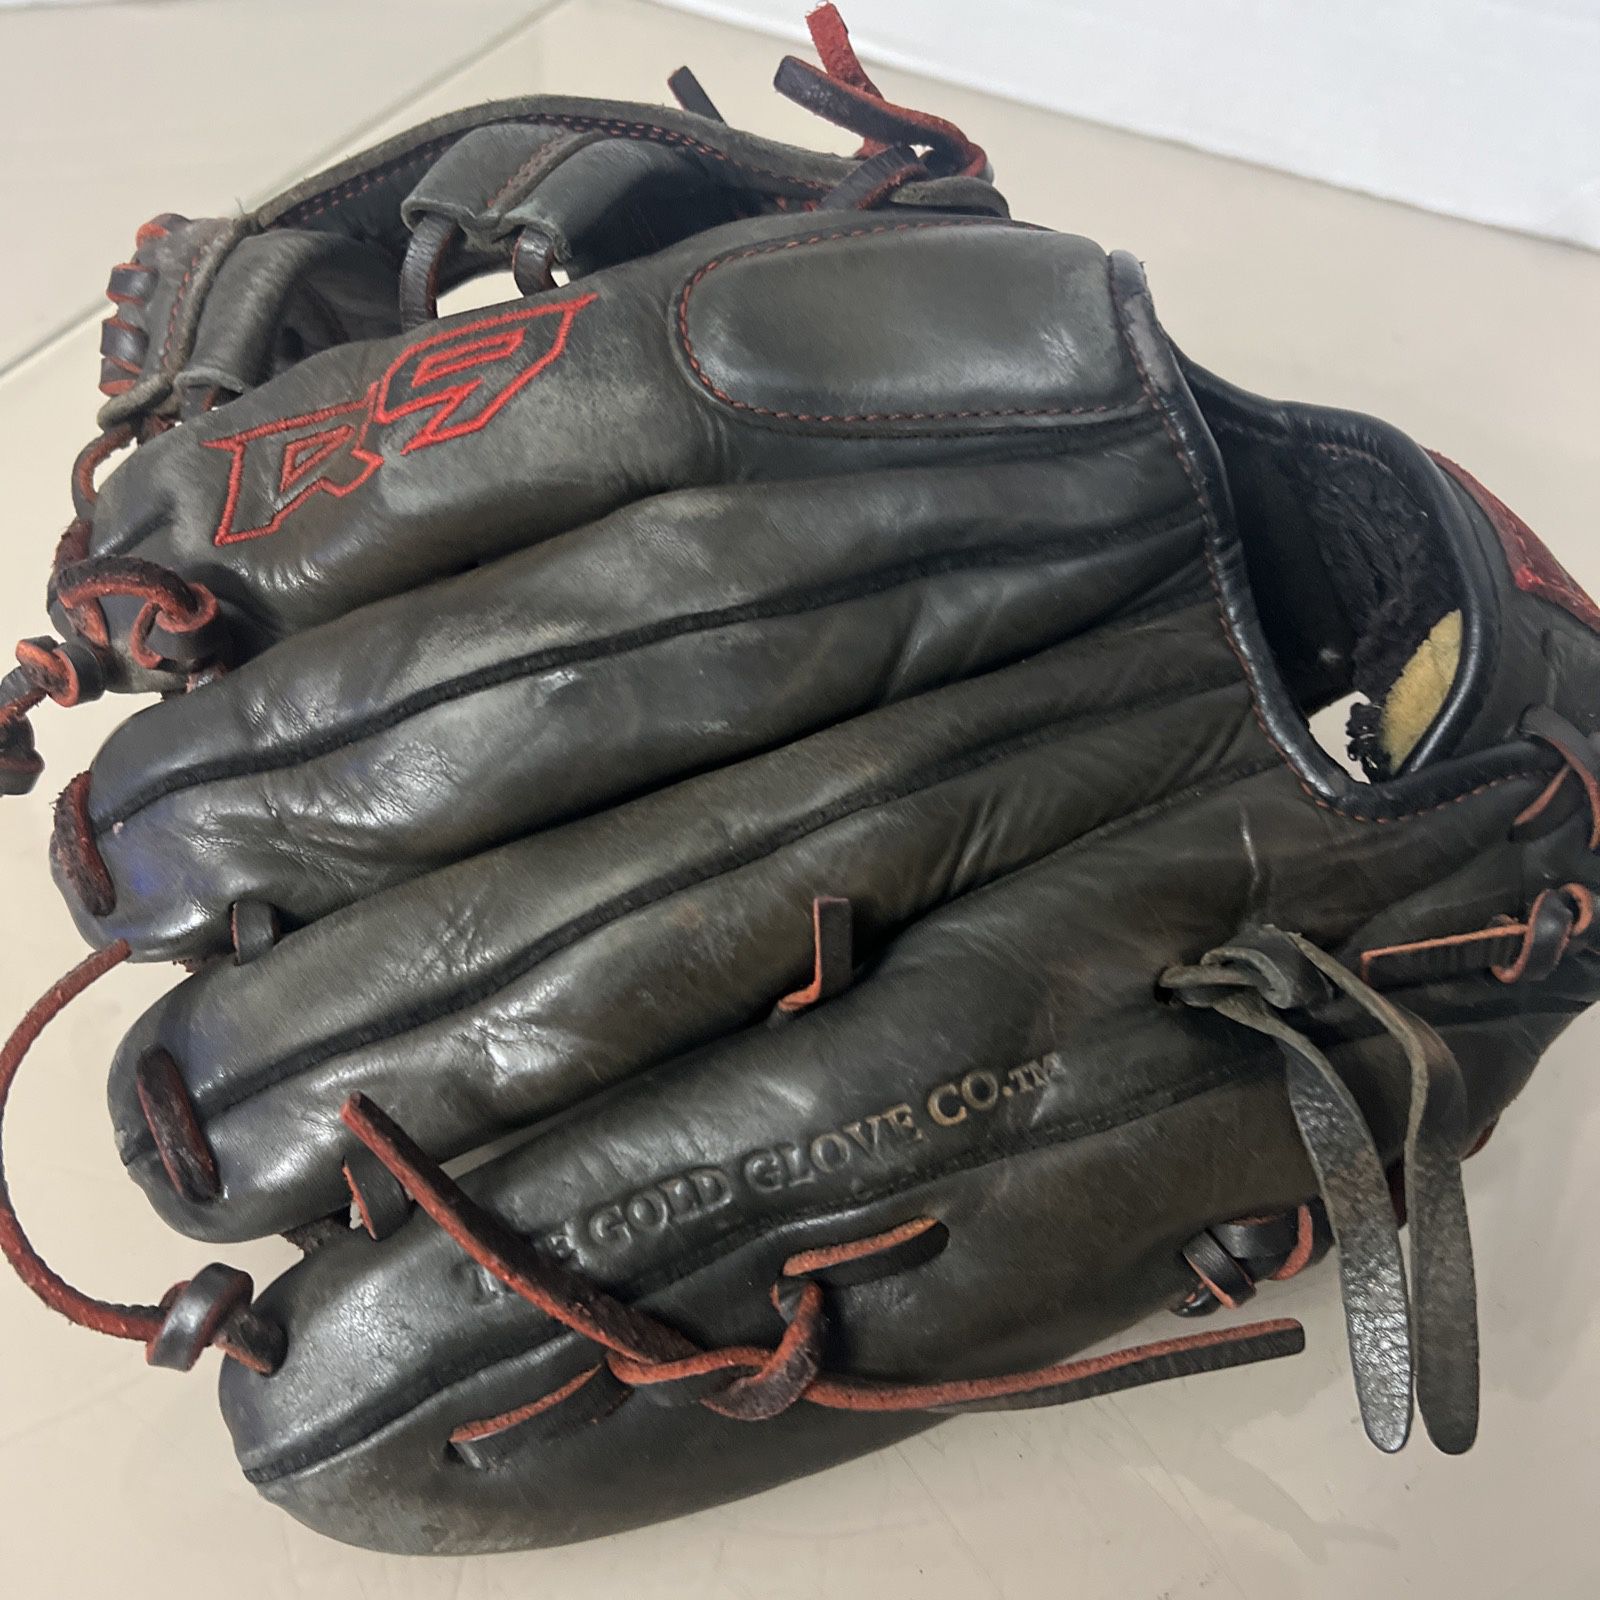 Rawlings R9 11” Youth Baseball Glove R9YPT1-19B Regular Right Hand Throw READ. Used in good condition. The gloves is well broken in. The main note wou